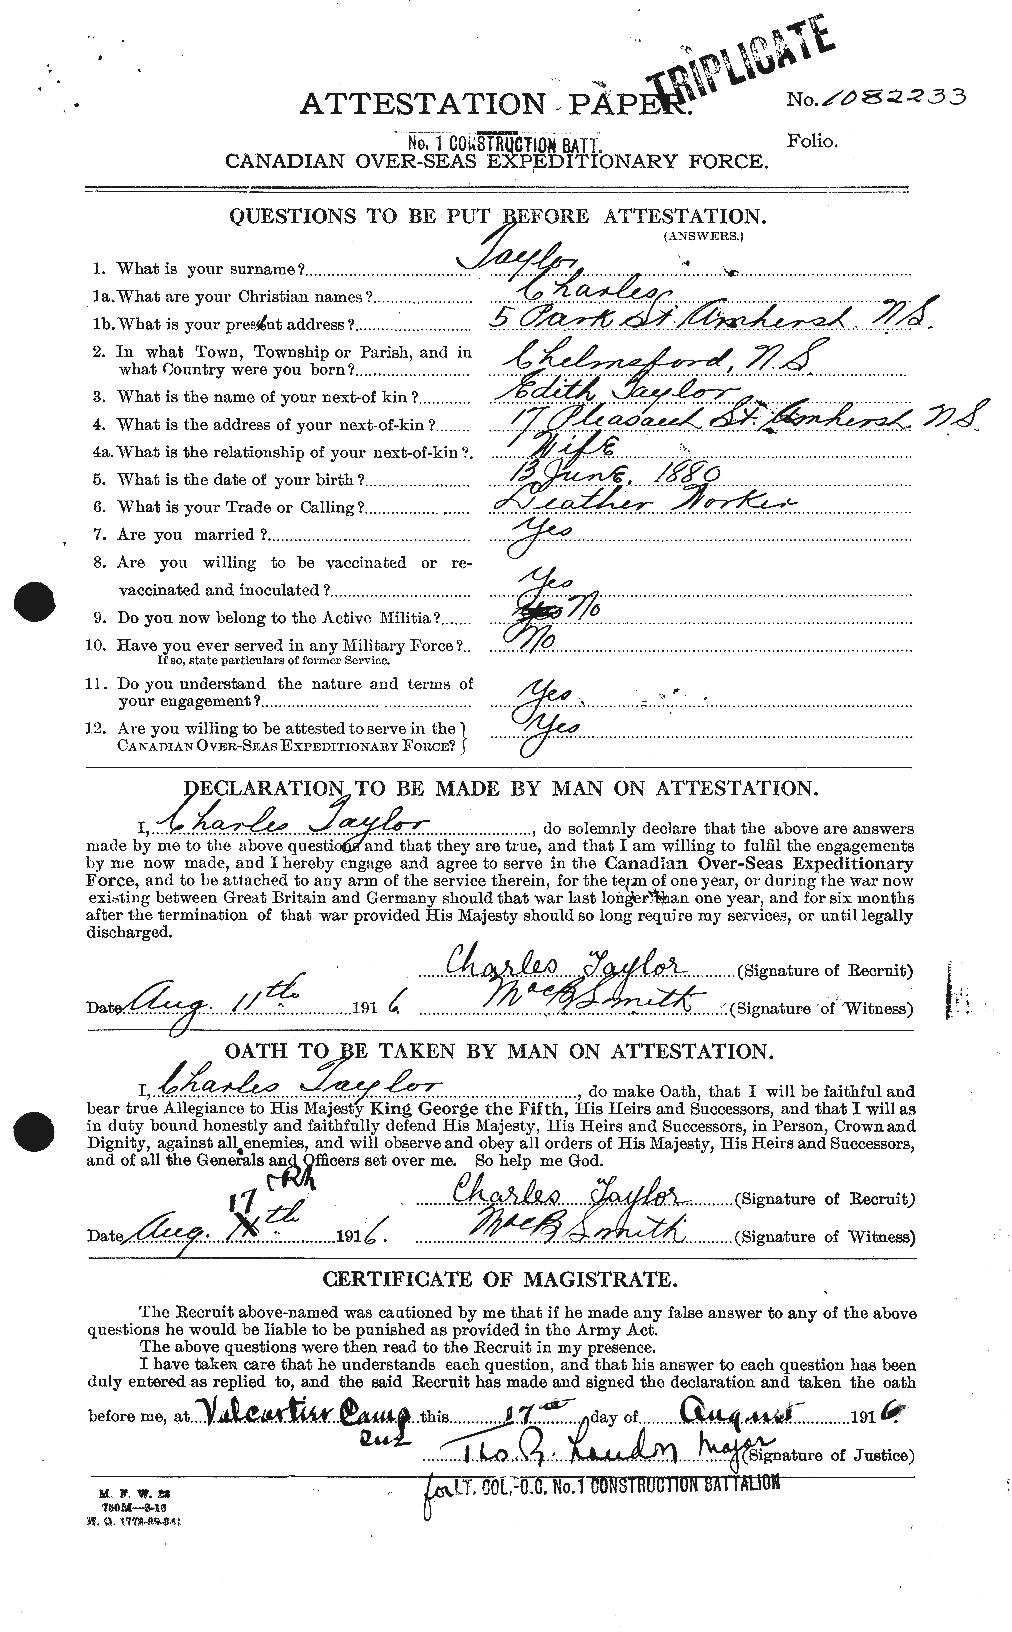 Personnel Records of the First World War - CEF 626802a